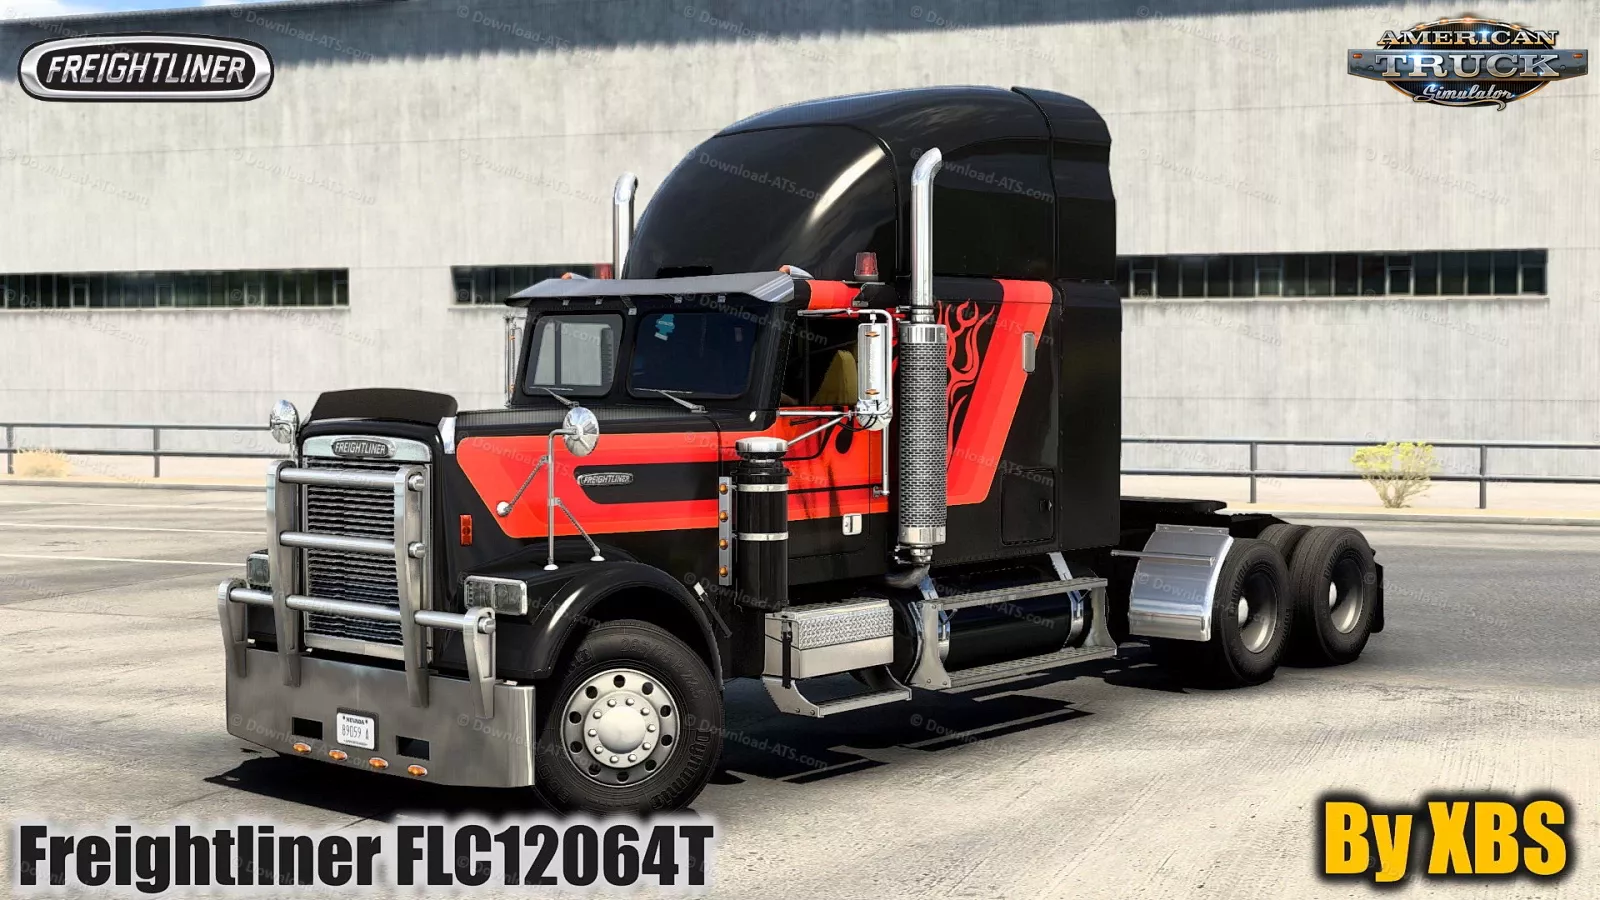 Freightliner FLC12064T Truck v1.1 By XBS (1.50.x) for ATS